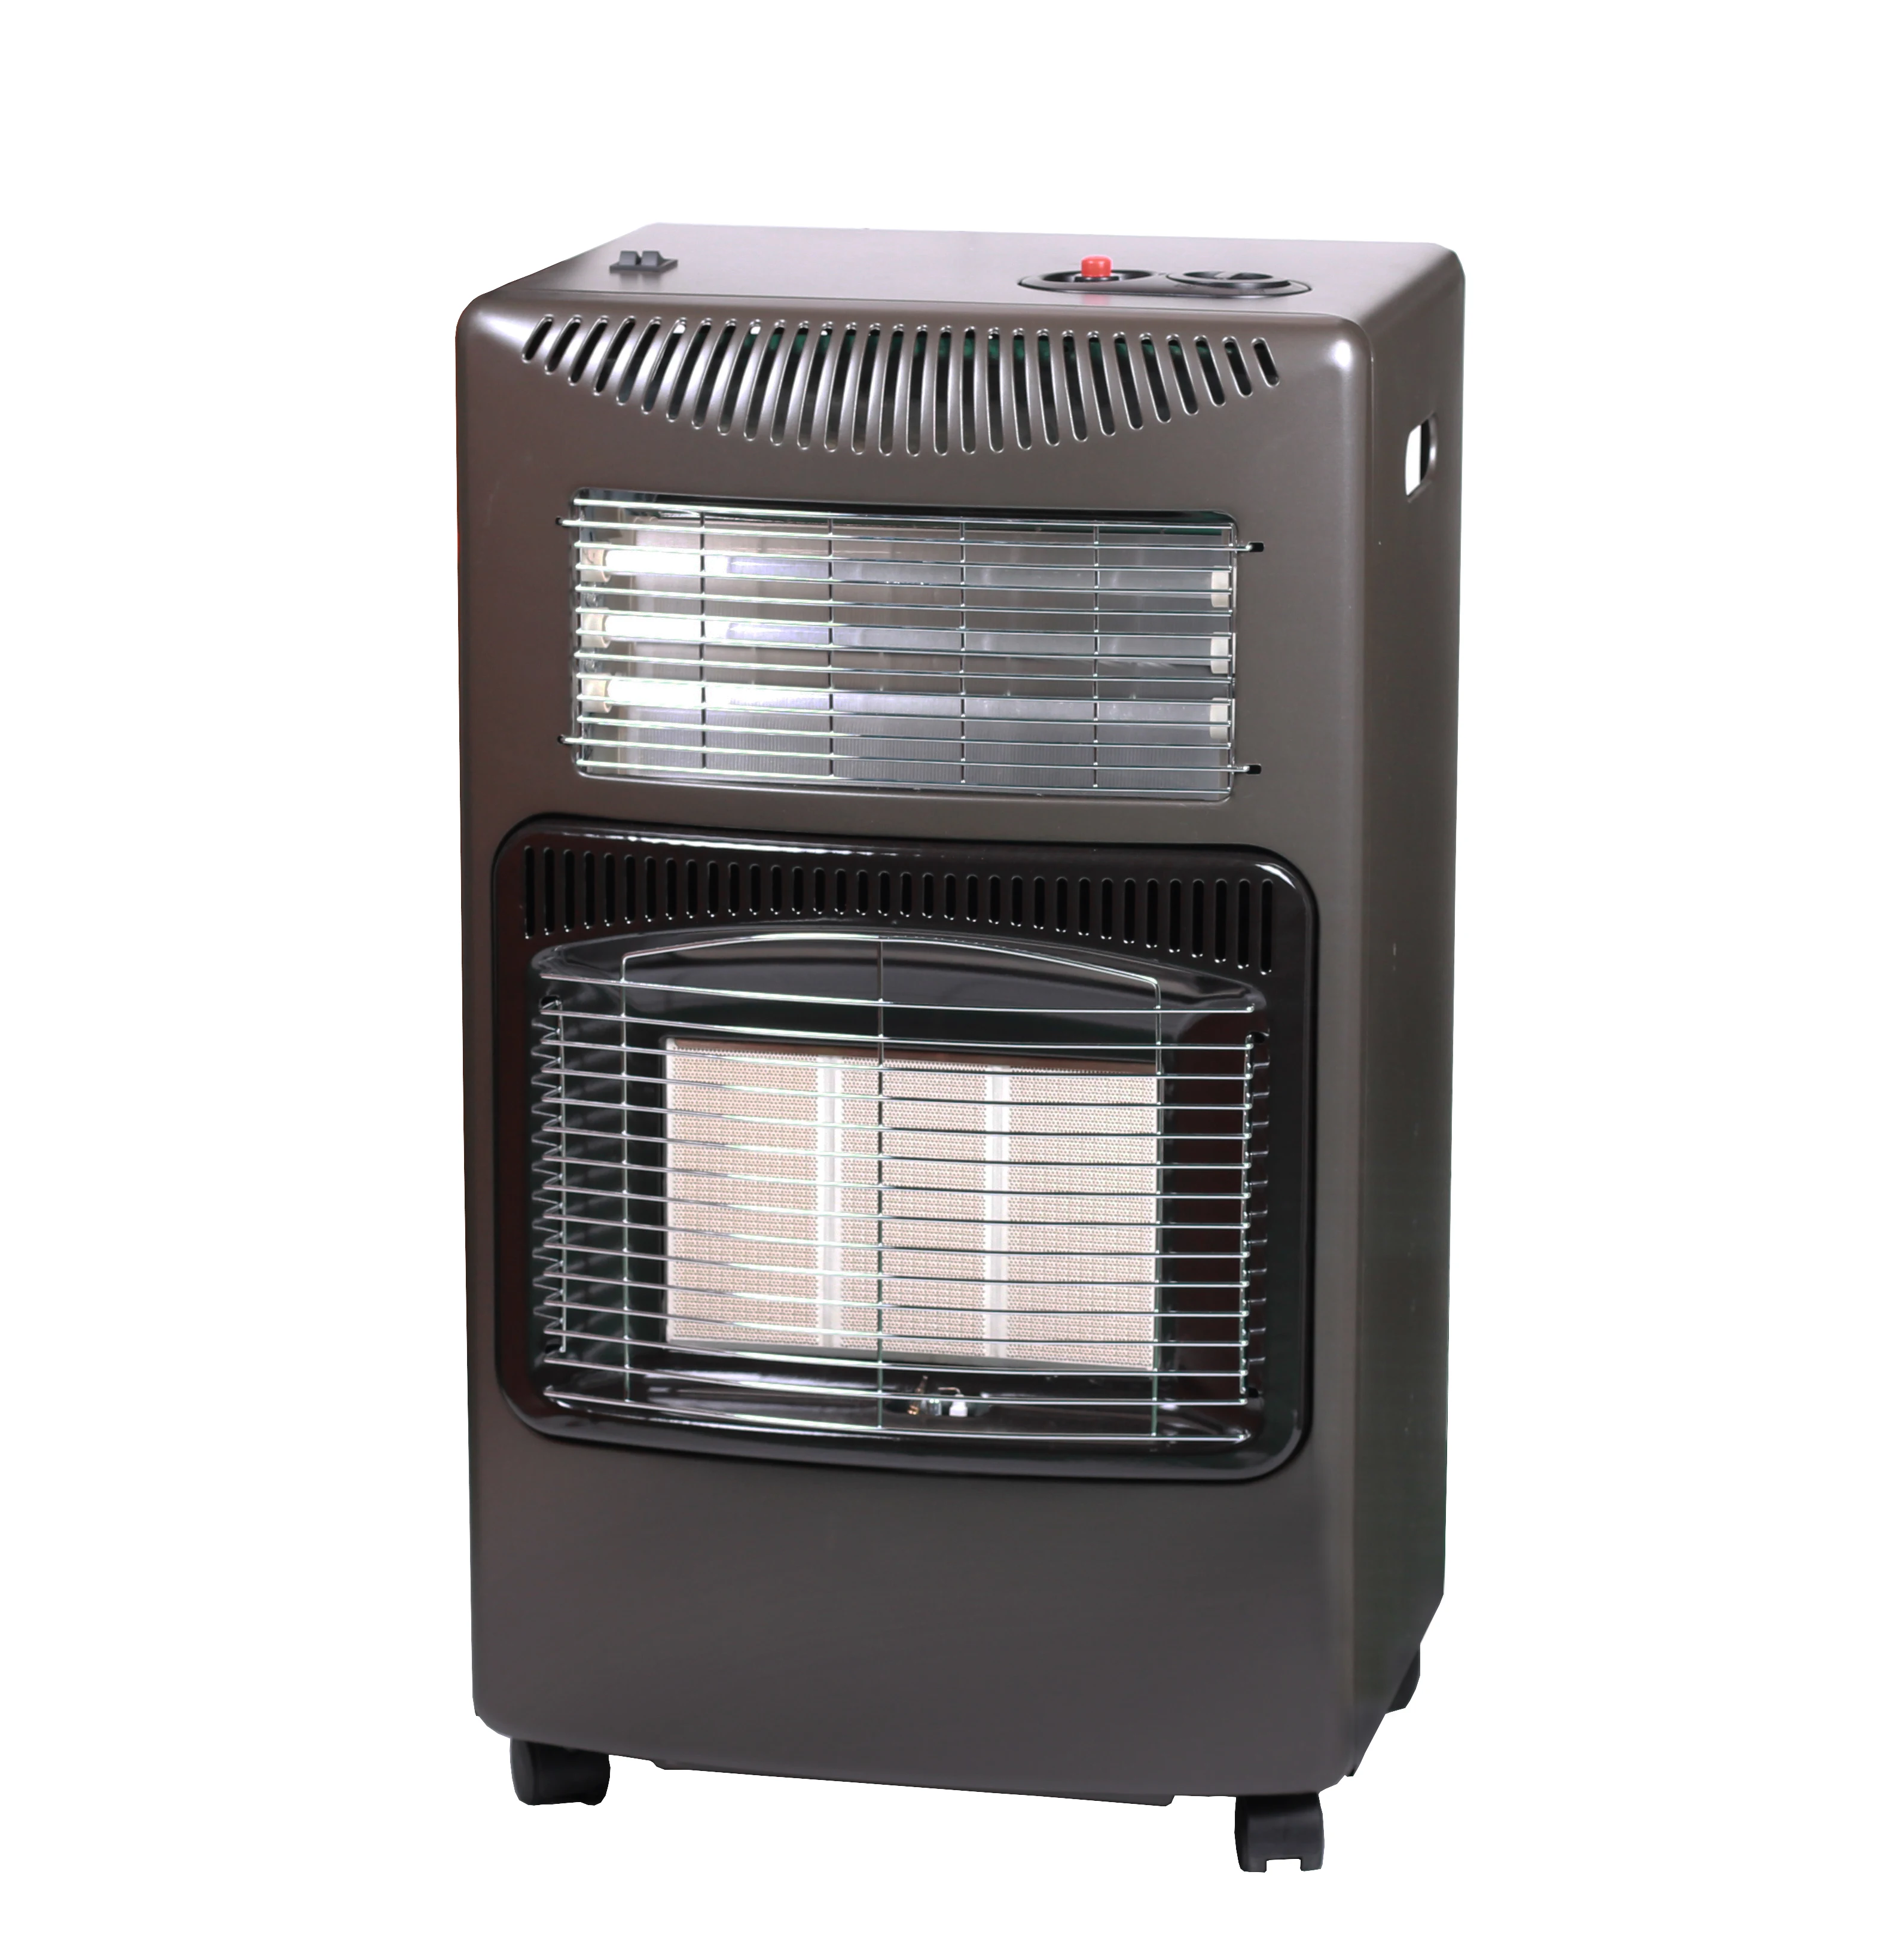 Marxistisch Voorganger alliantie The Latest Design Energy Saving Butane Gas Heater Portable Gas Heater  Freestanding With Safety Protection Device - Buy Butane Gas Heater,Gas Room  Heater,Indoor Room Gas Heater Product on Alibaba.com